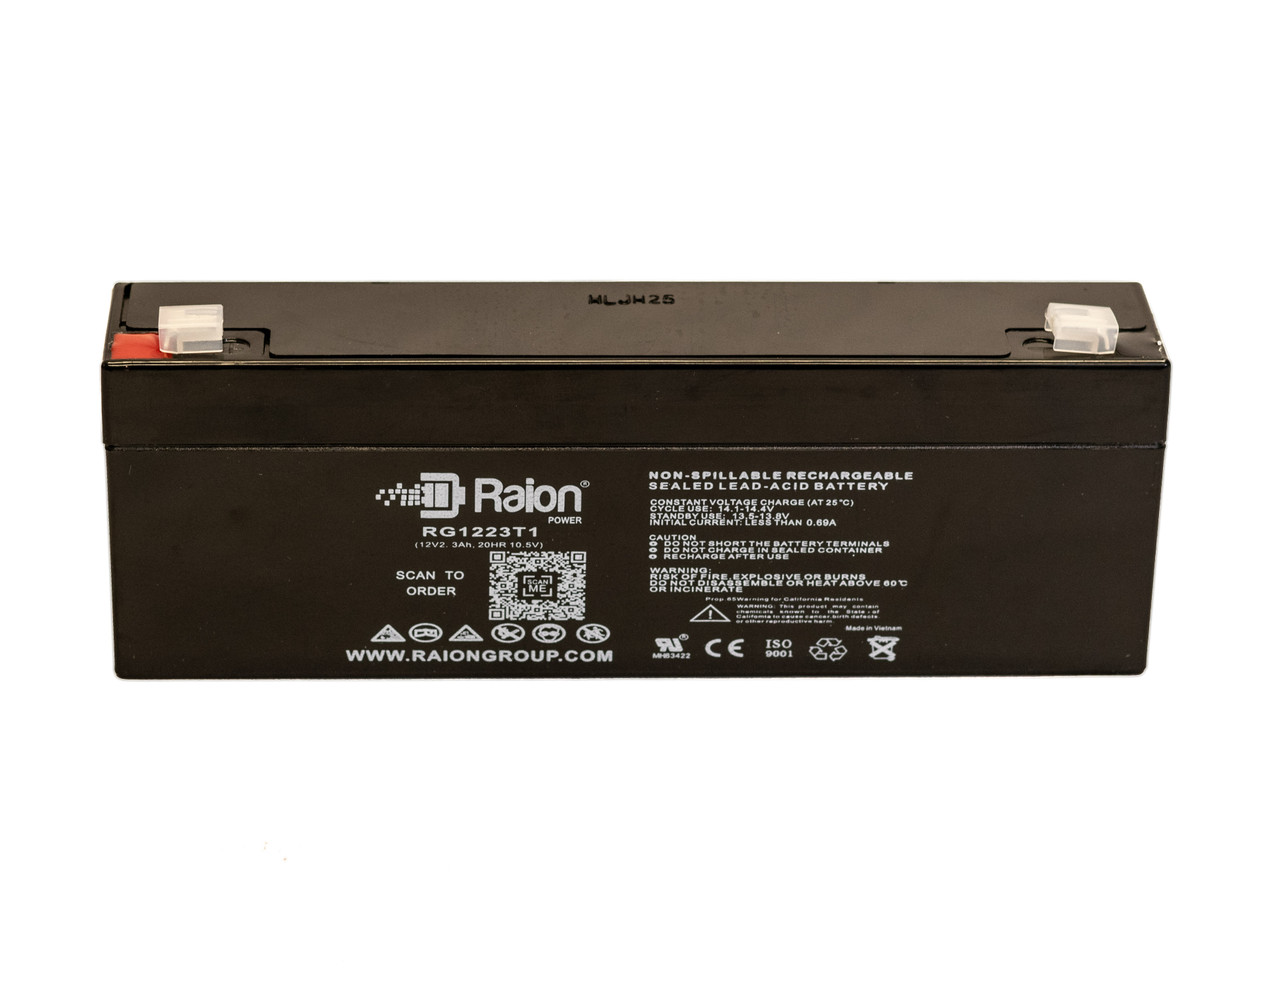 Raion Power 12V 2.3Ah SLA Battery With T1 Terminals For Criticare Systems 507ES, 507N Patient Monitor